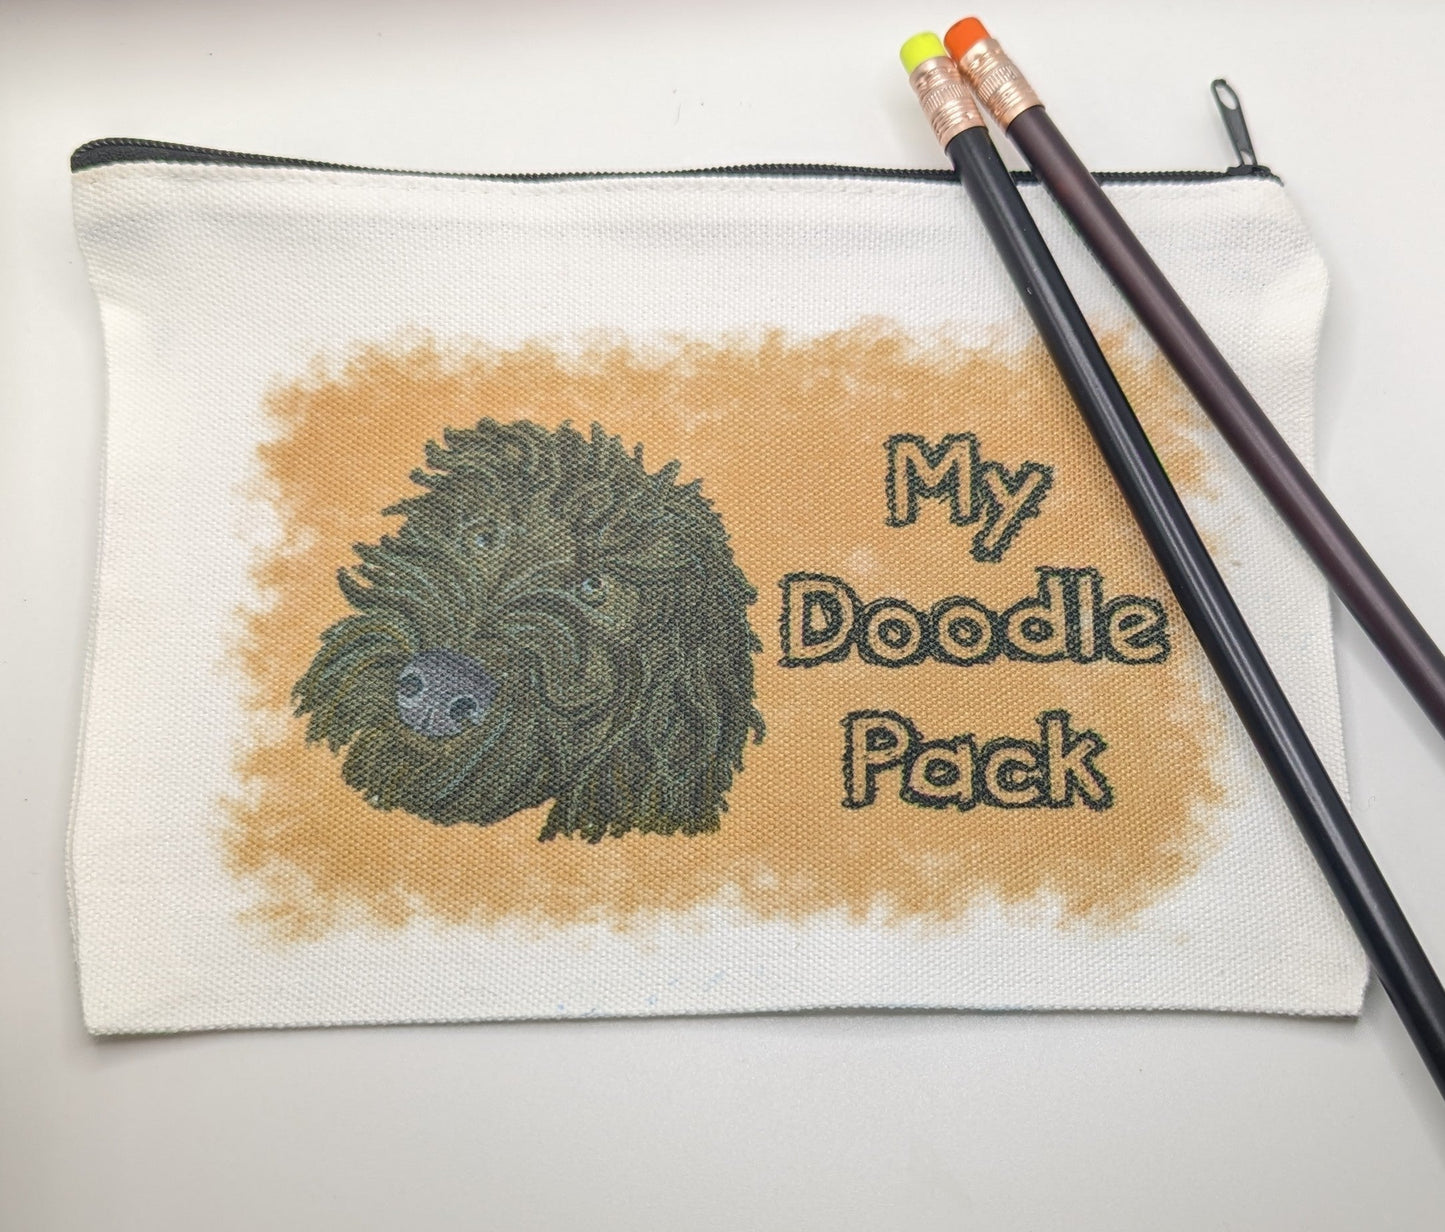 My Doodle Pack- 9x 6.89 inch Doodle Dog pencil pouch IRISisBEAUTY collaboration